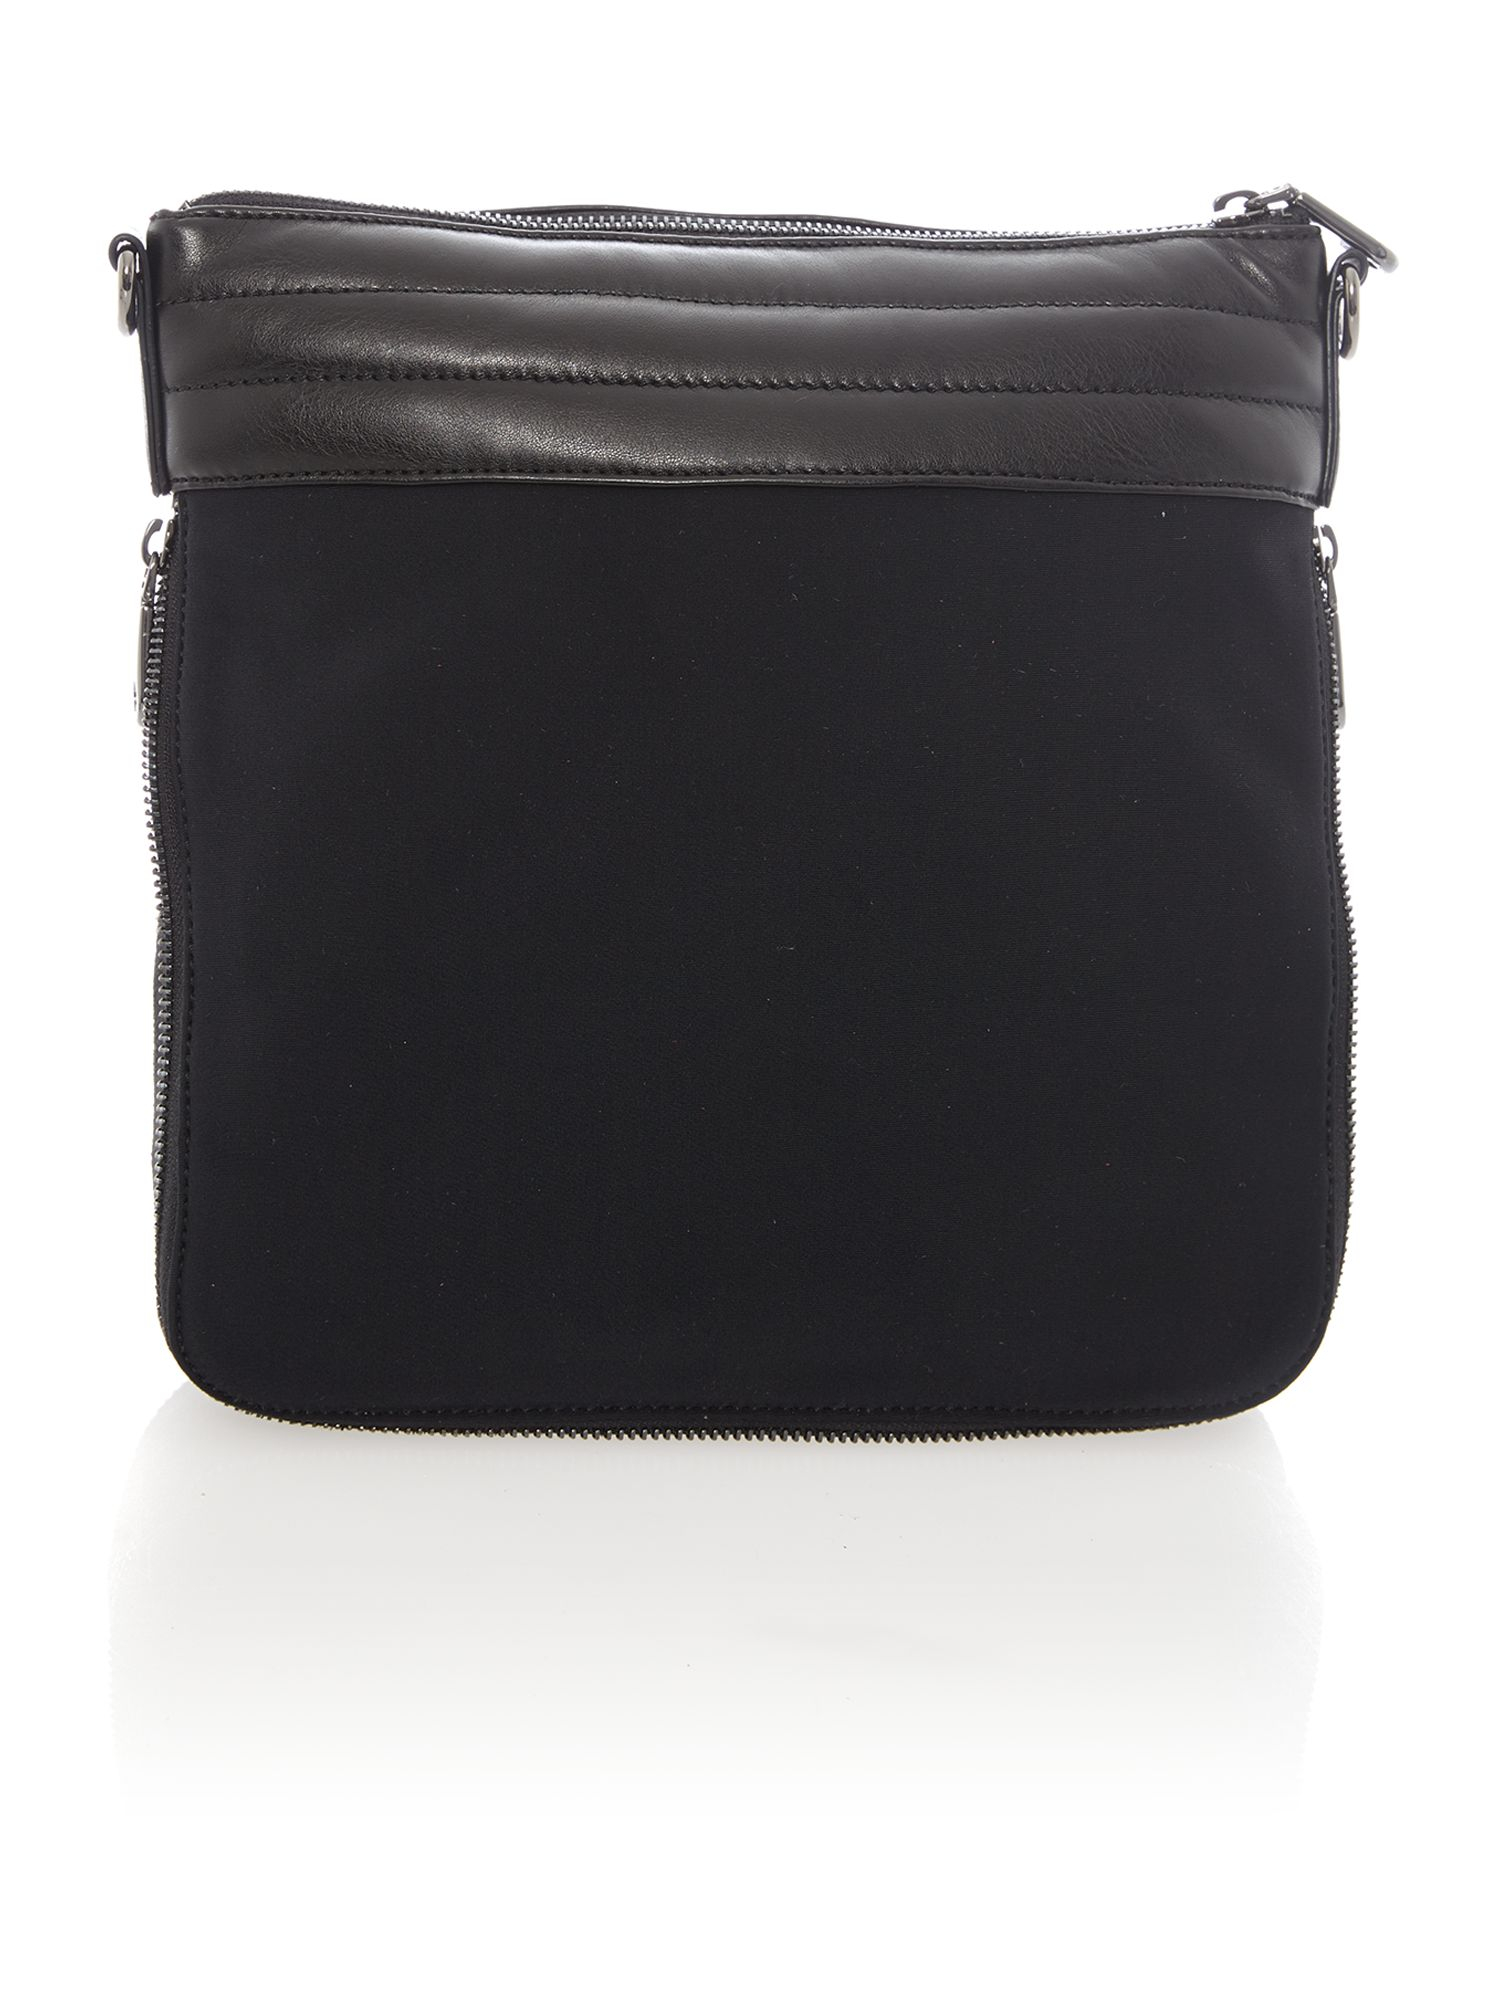 Dkny Black Quilted Mixed Media Cross Body Bag in Black | Lyst